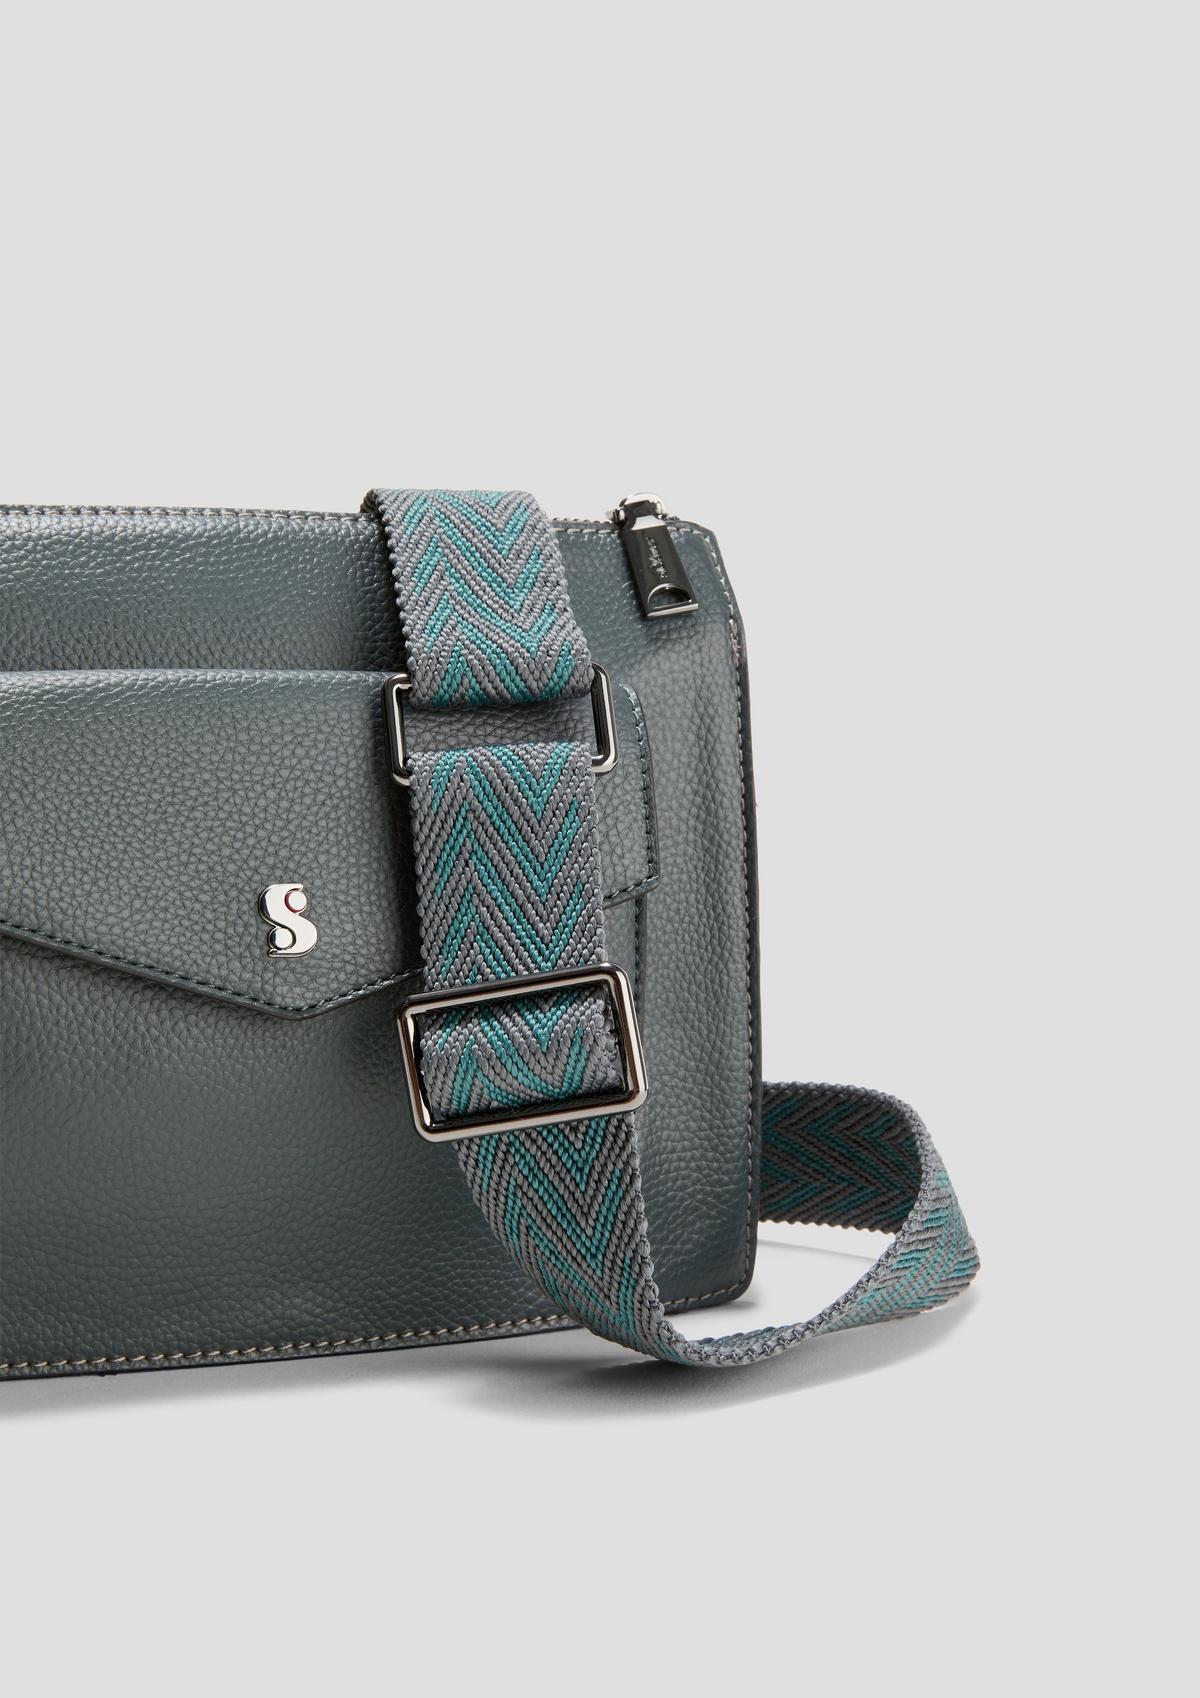 s.Oliver Bag strap with a woven pattern